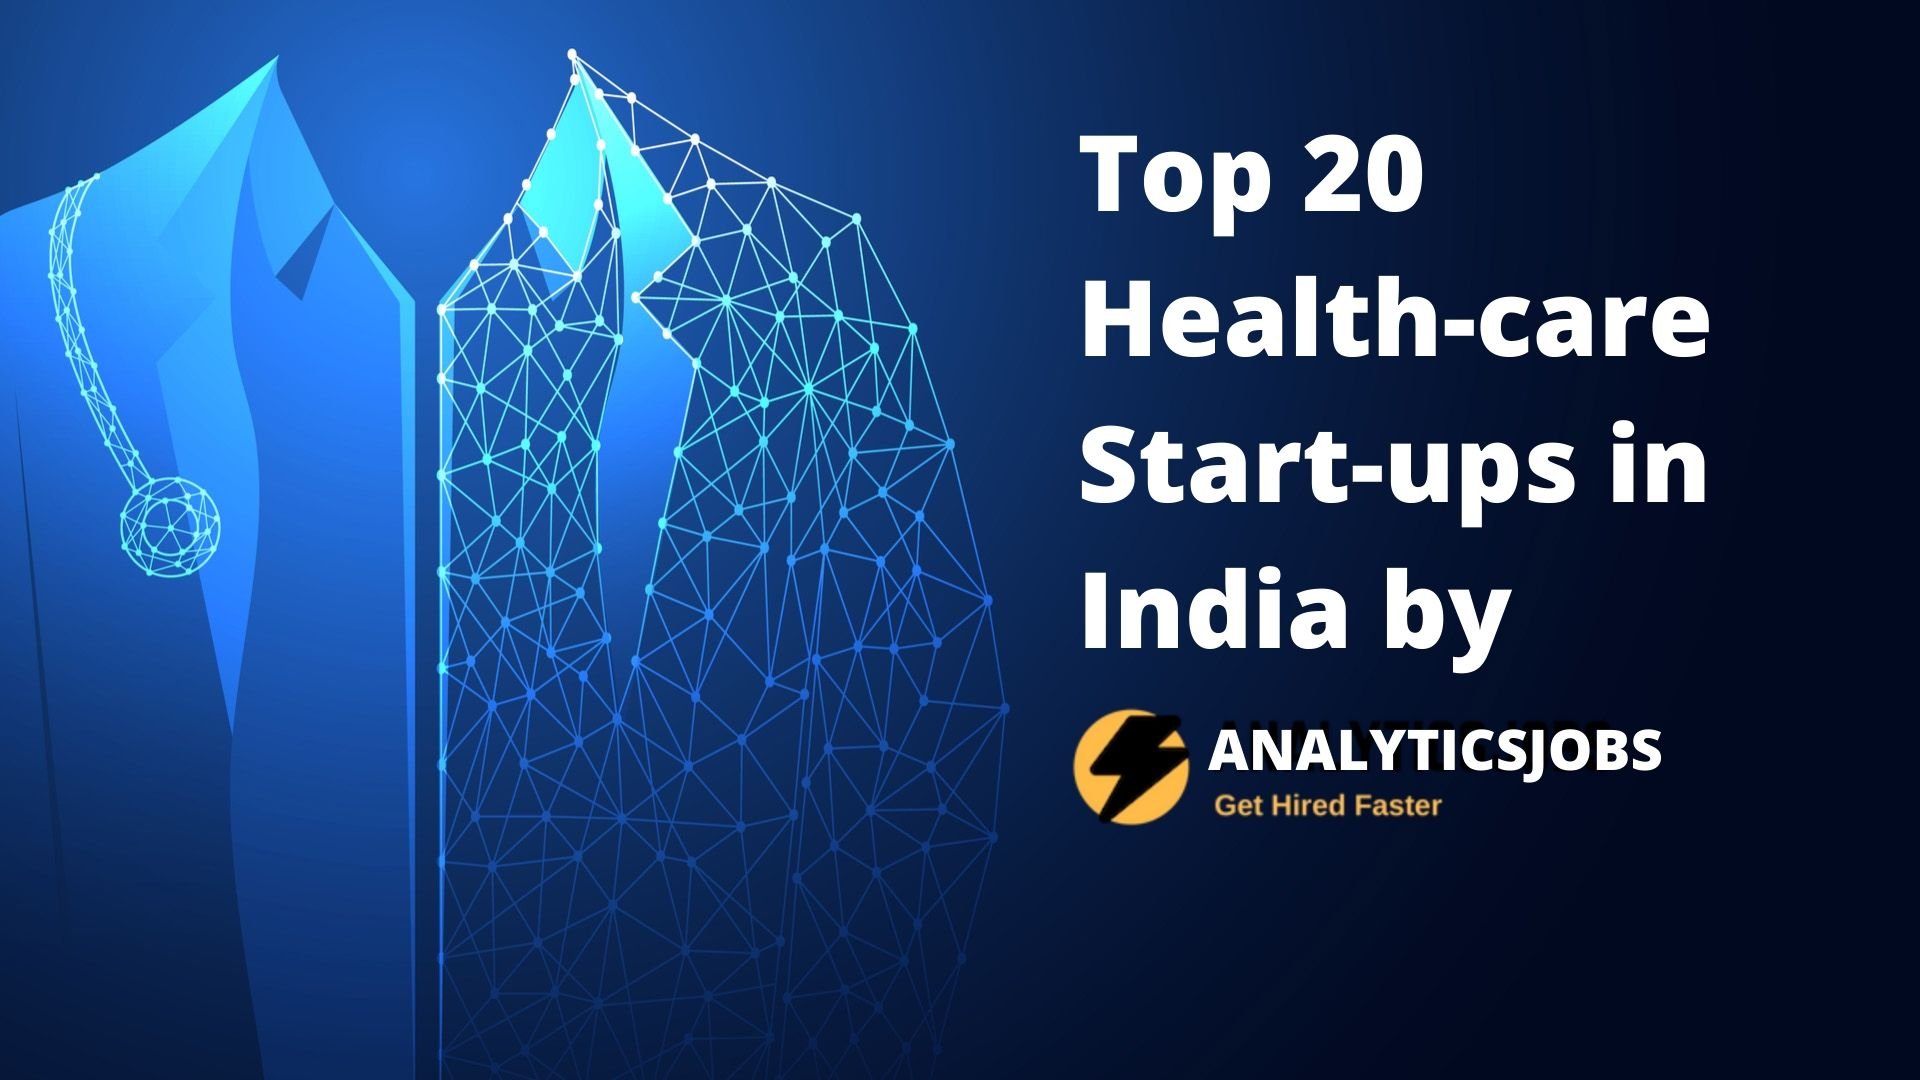 Top 20 Start ups in India revolutionizing Health Care Industry with Artificial Intelligence